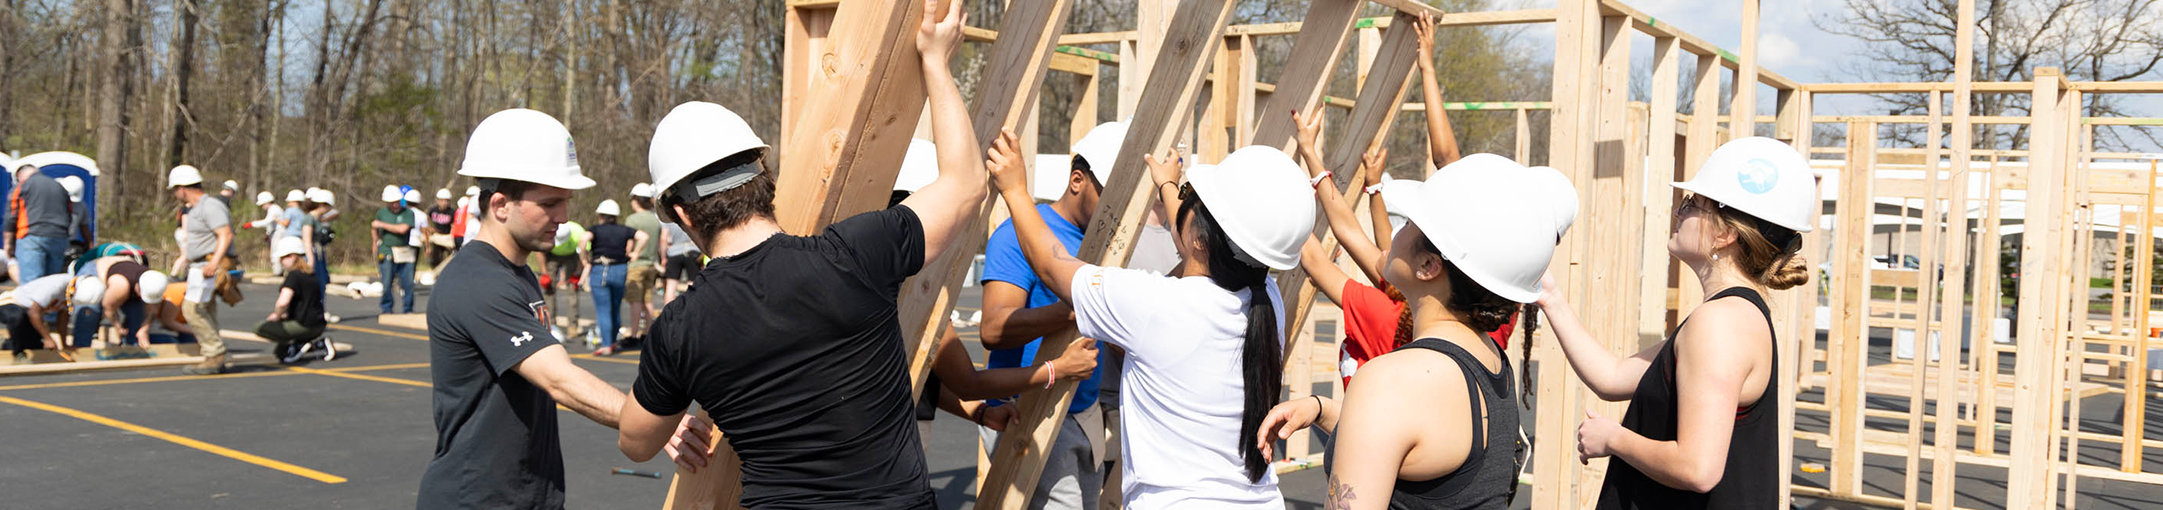 Students assemble a house frame during Framing Frenzy